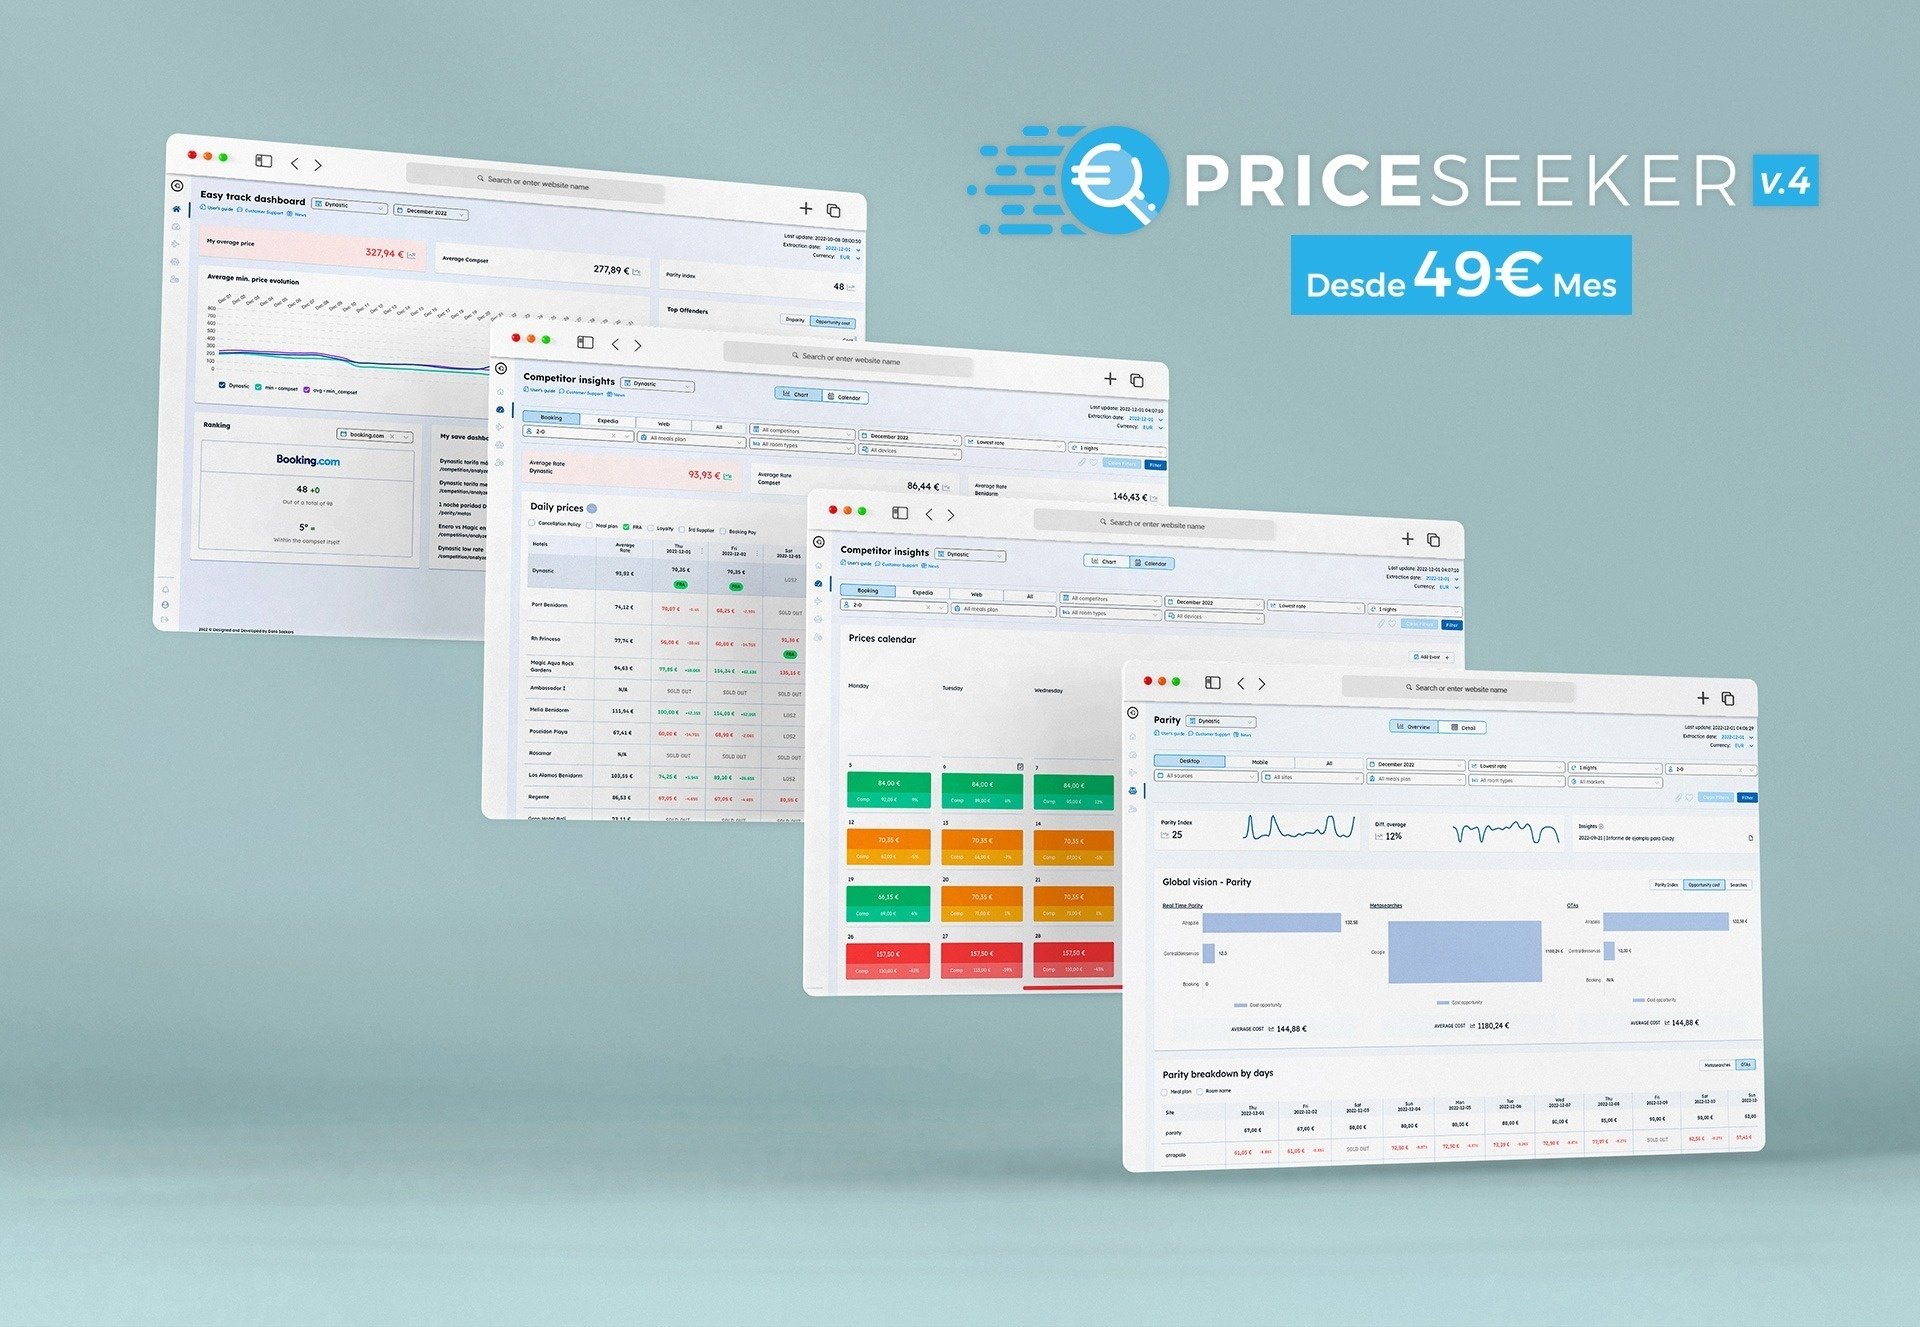 Price Seeker v4 from €49 per month: the day has come